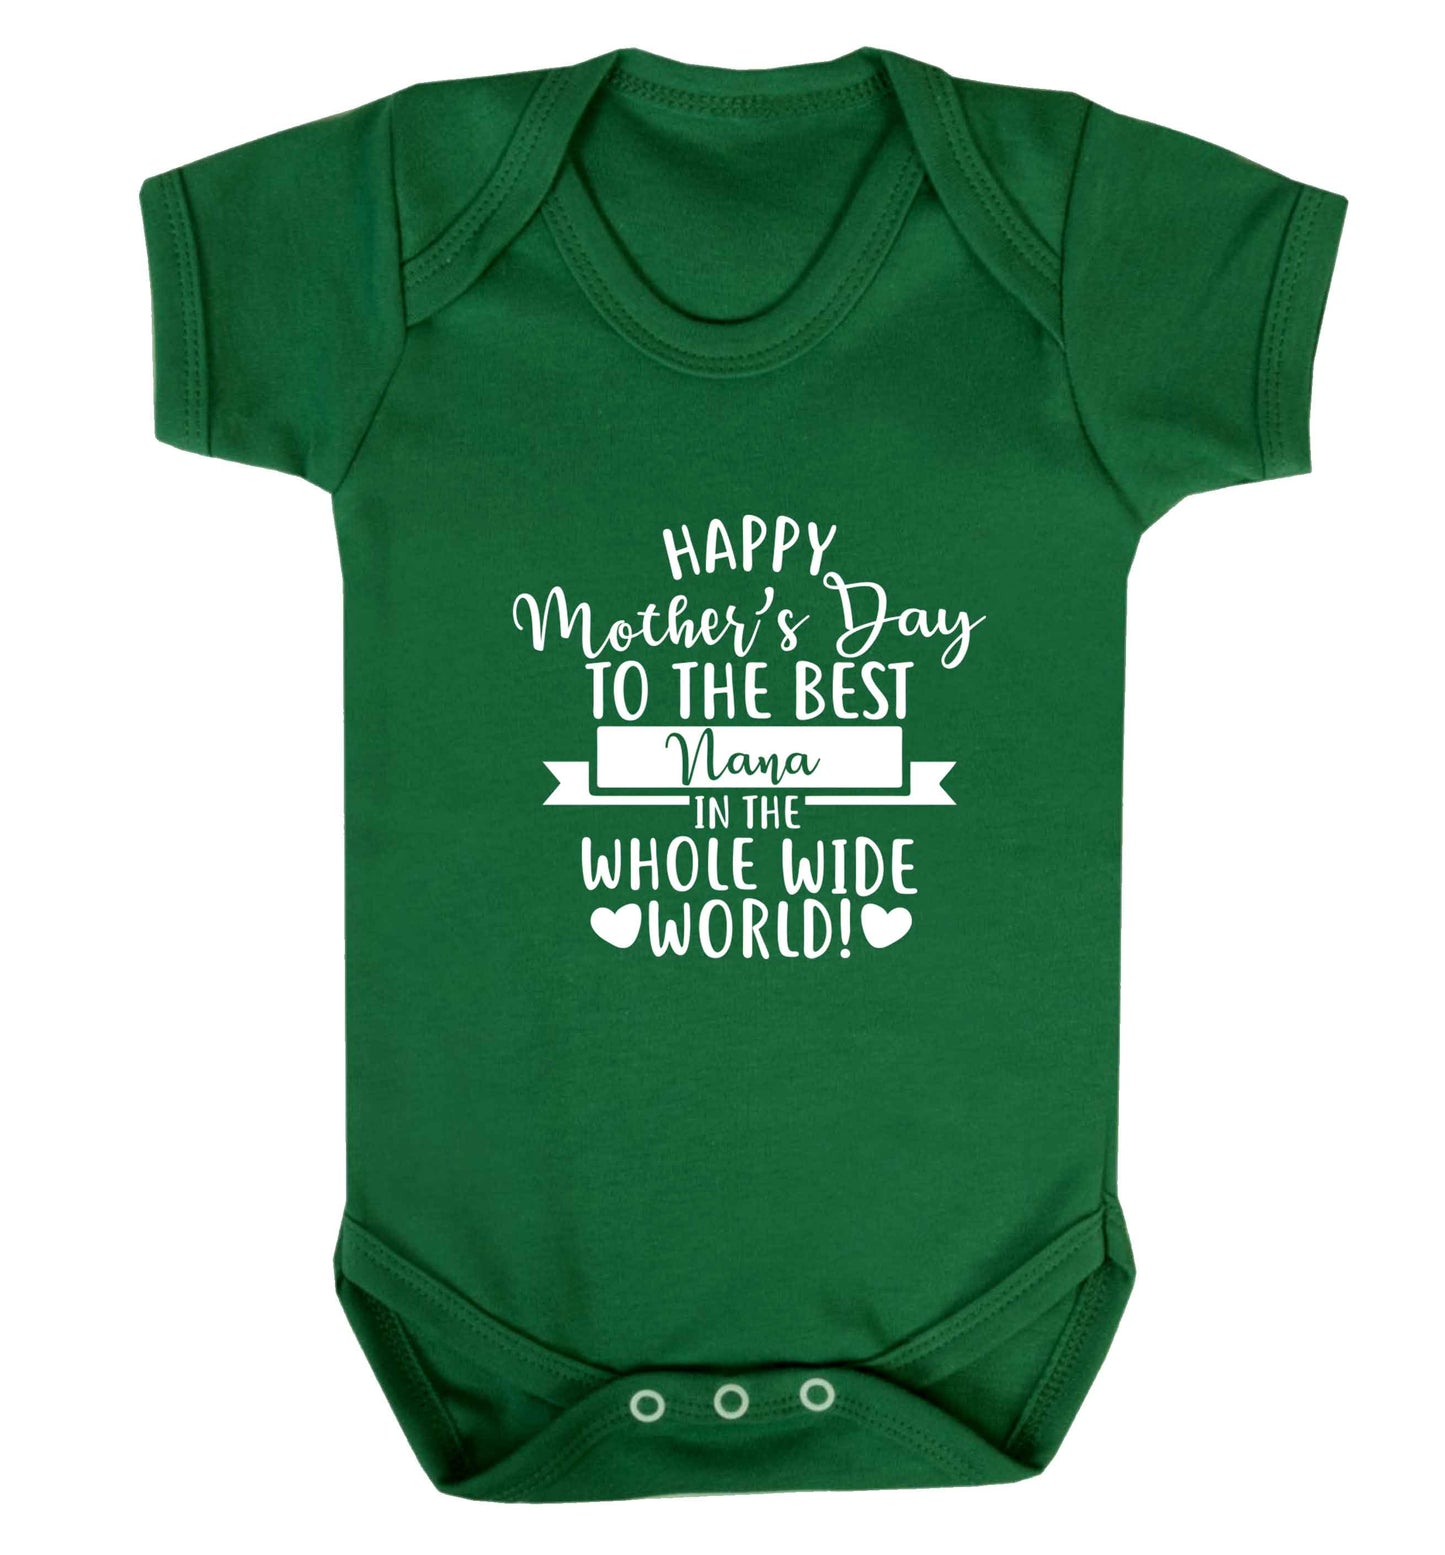 Happy mother's day to the best nana in the world baby vest green 18-24 months